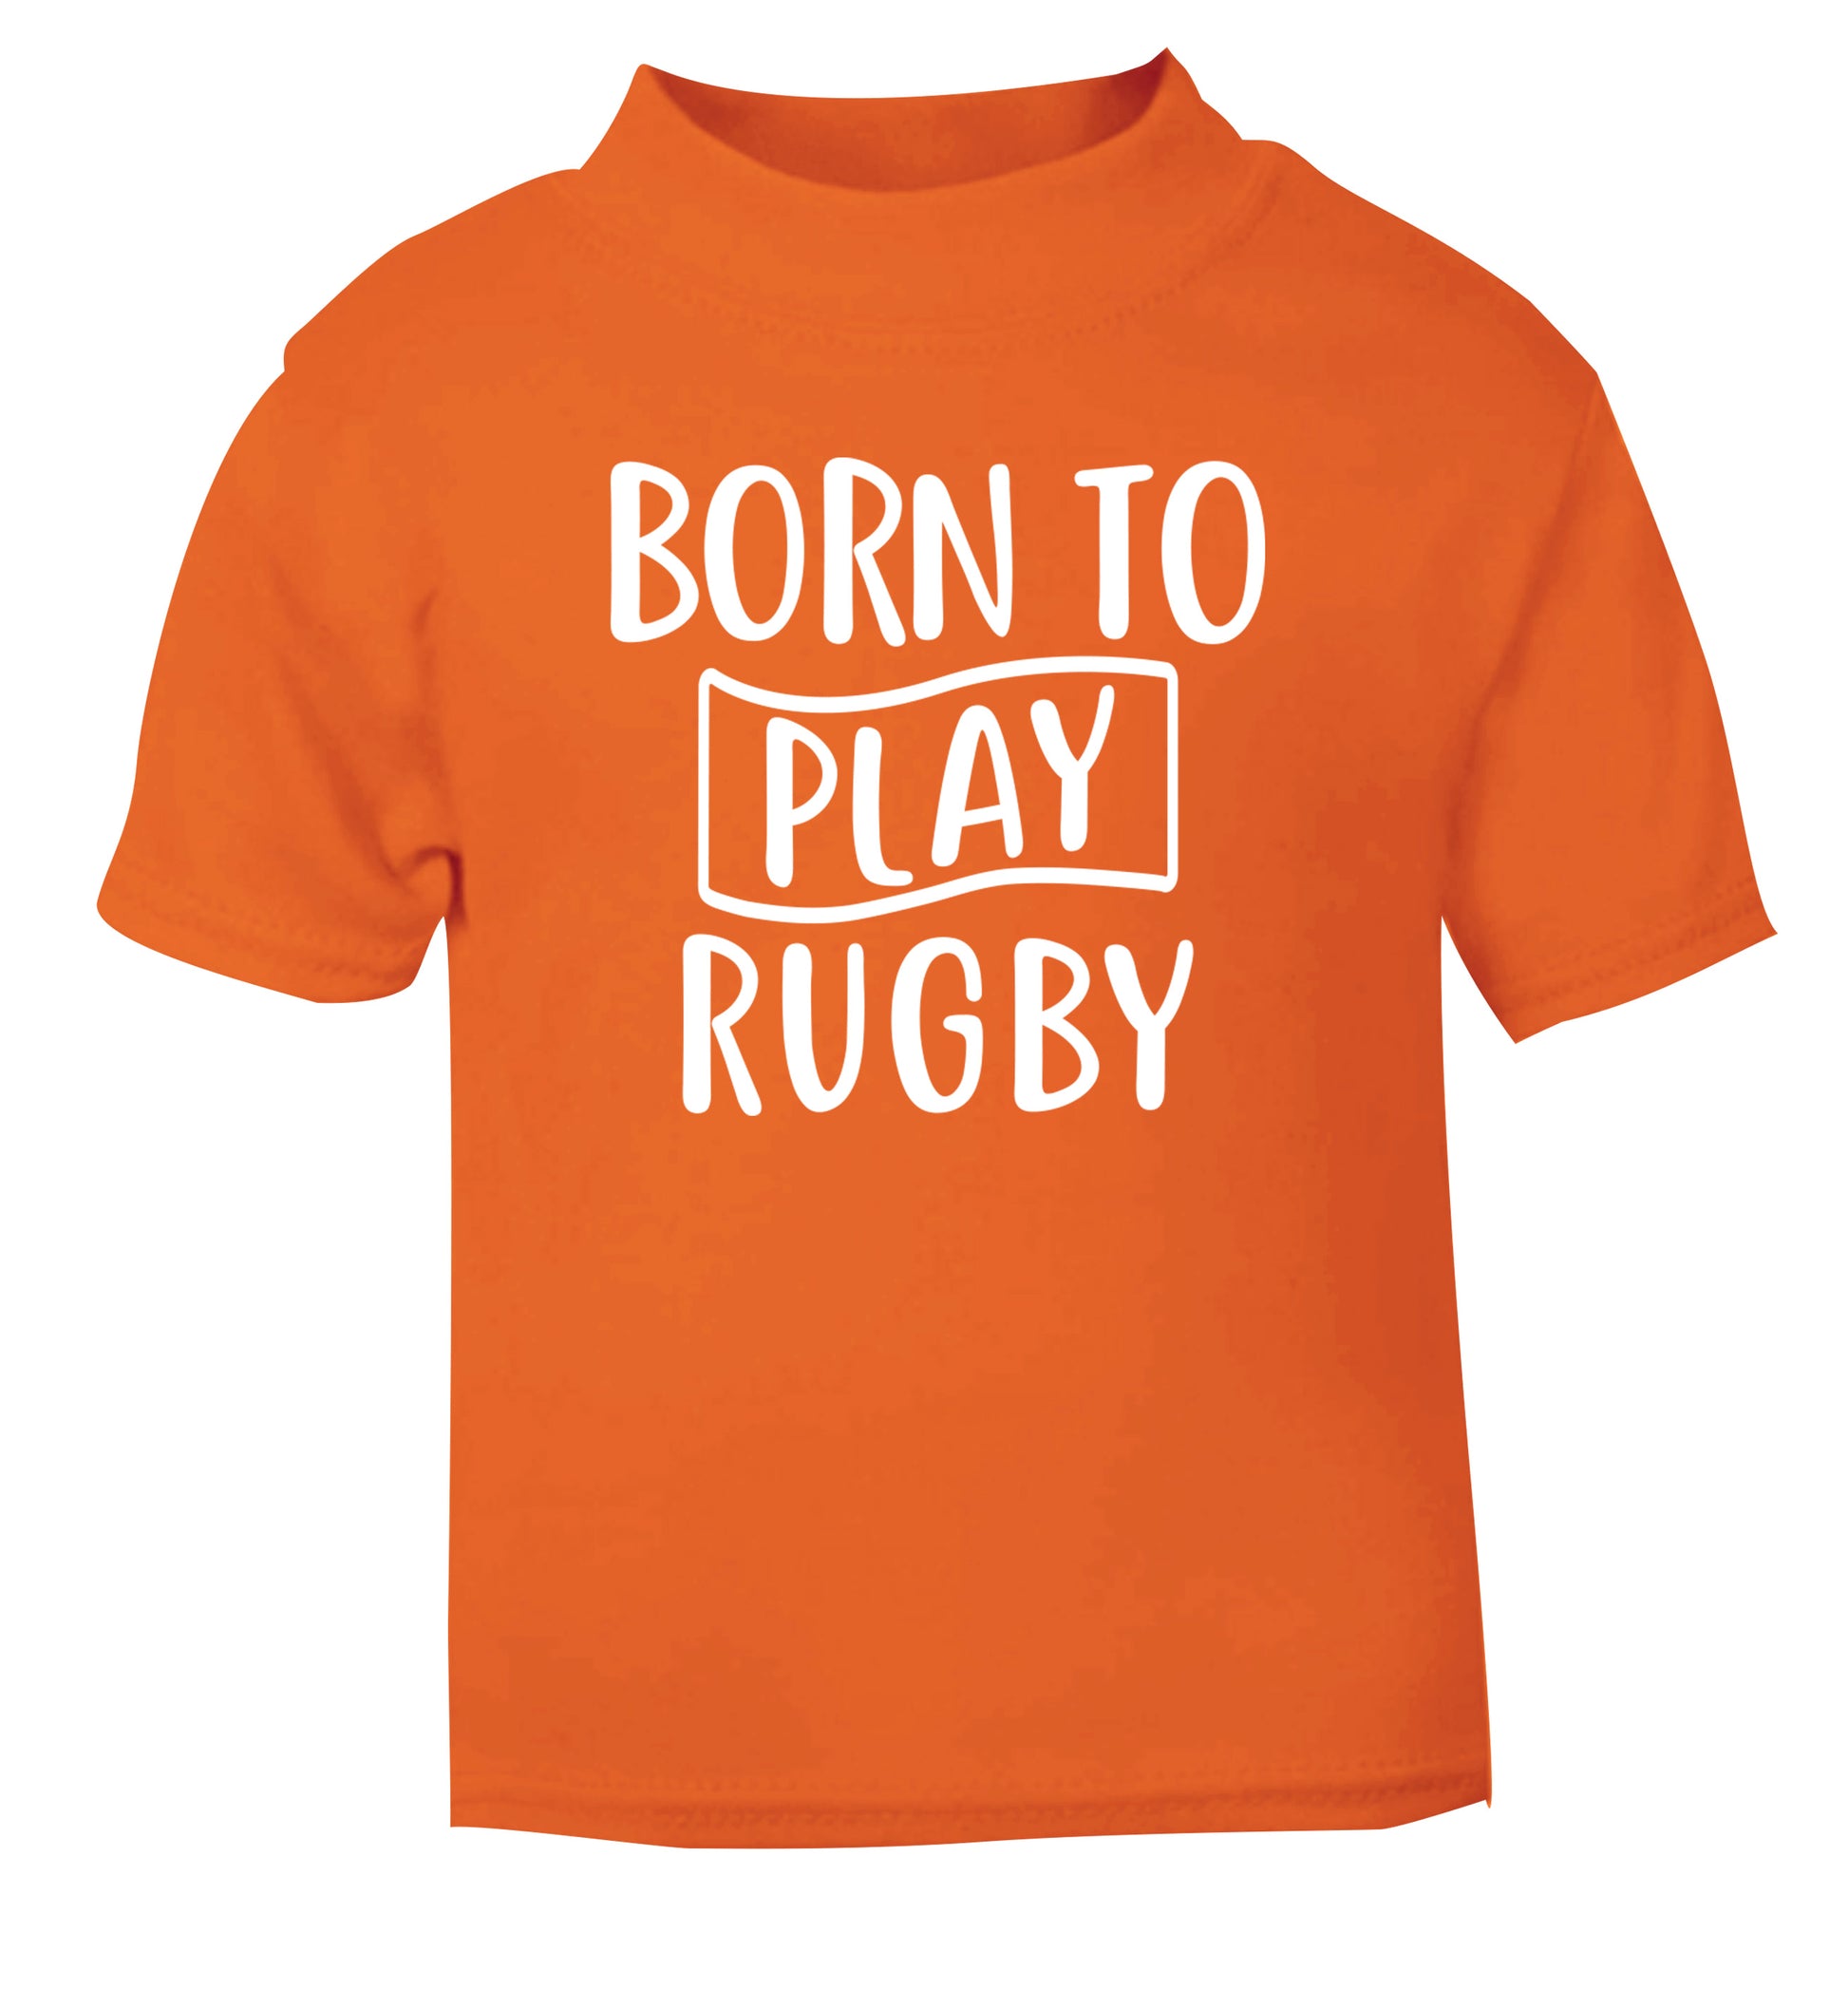 Born to play rugby orange Baby Toddler Tshirt 2 Years